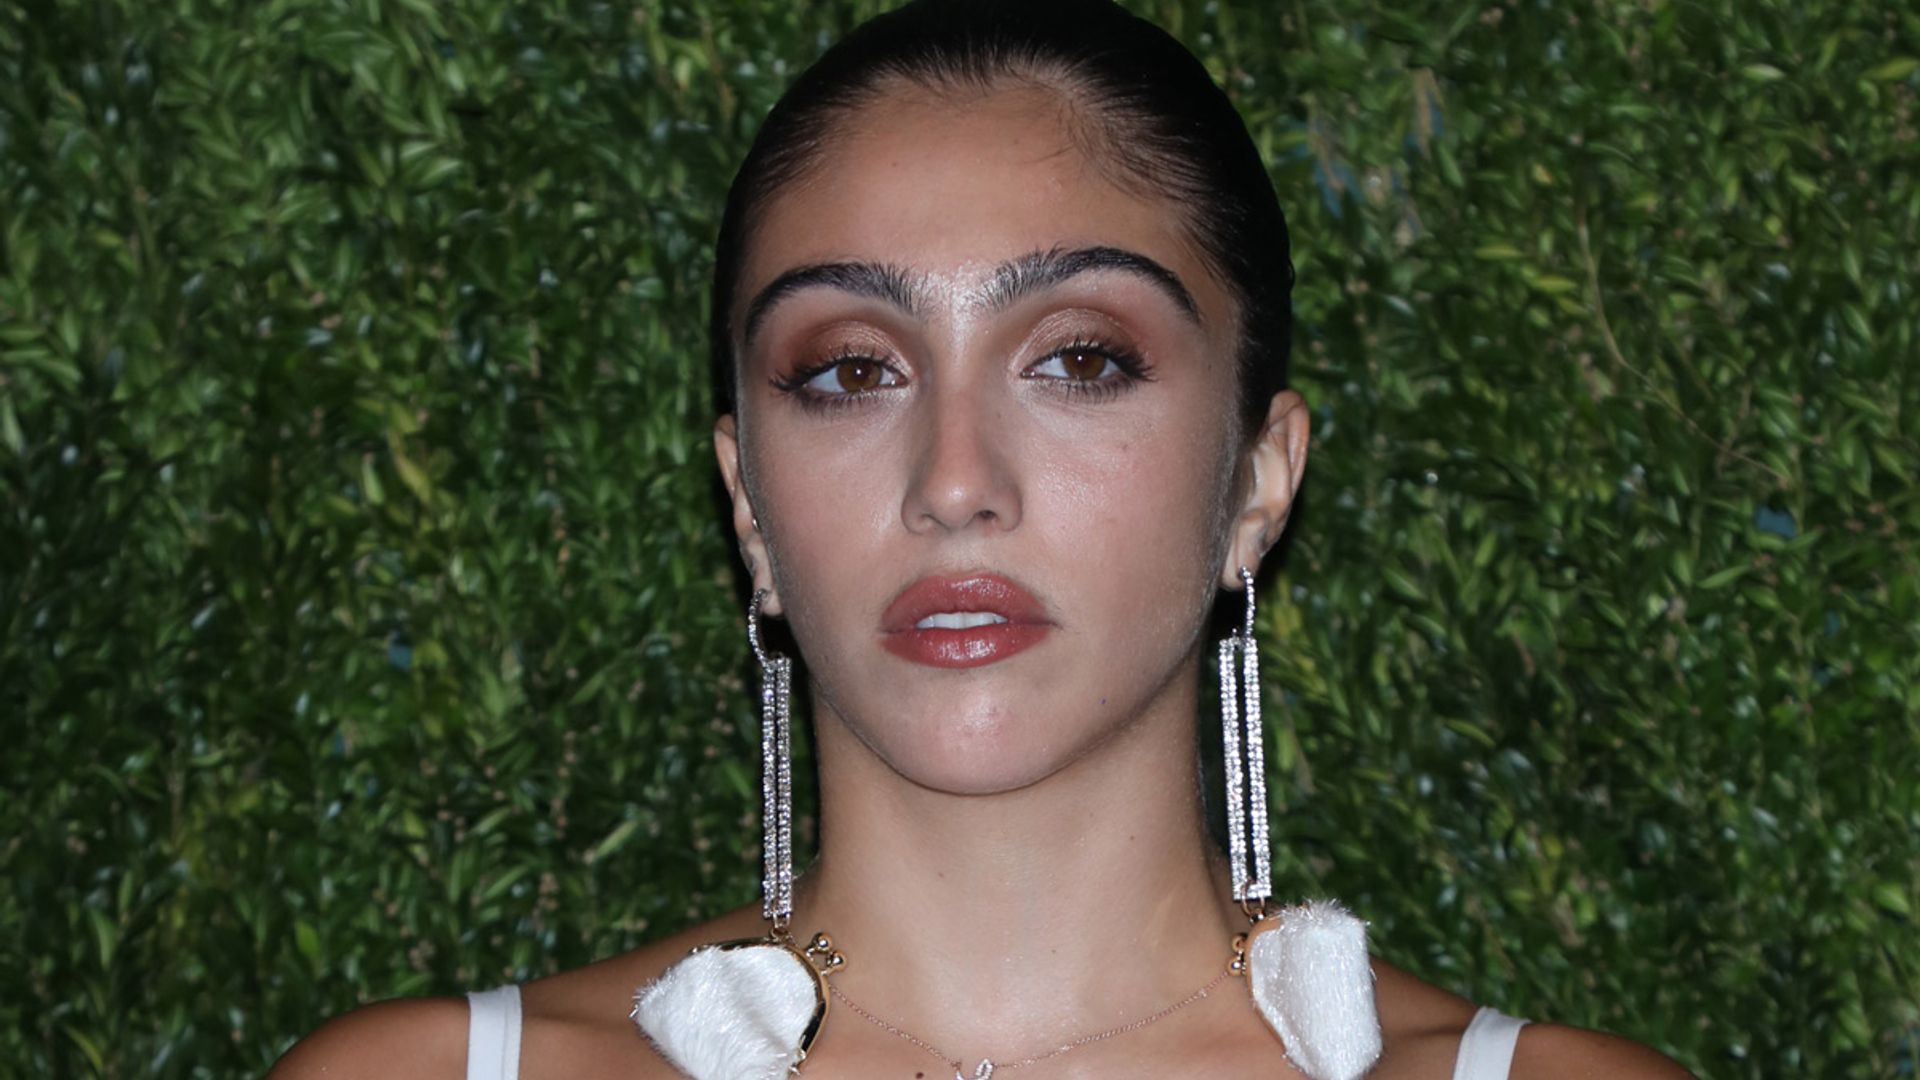 Madonna's daughter Lourdes Leon stuns in very risqué nude outfit